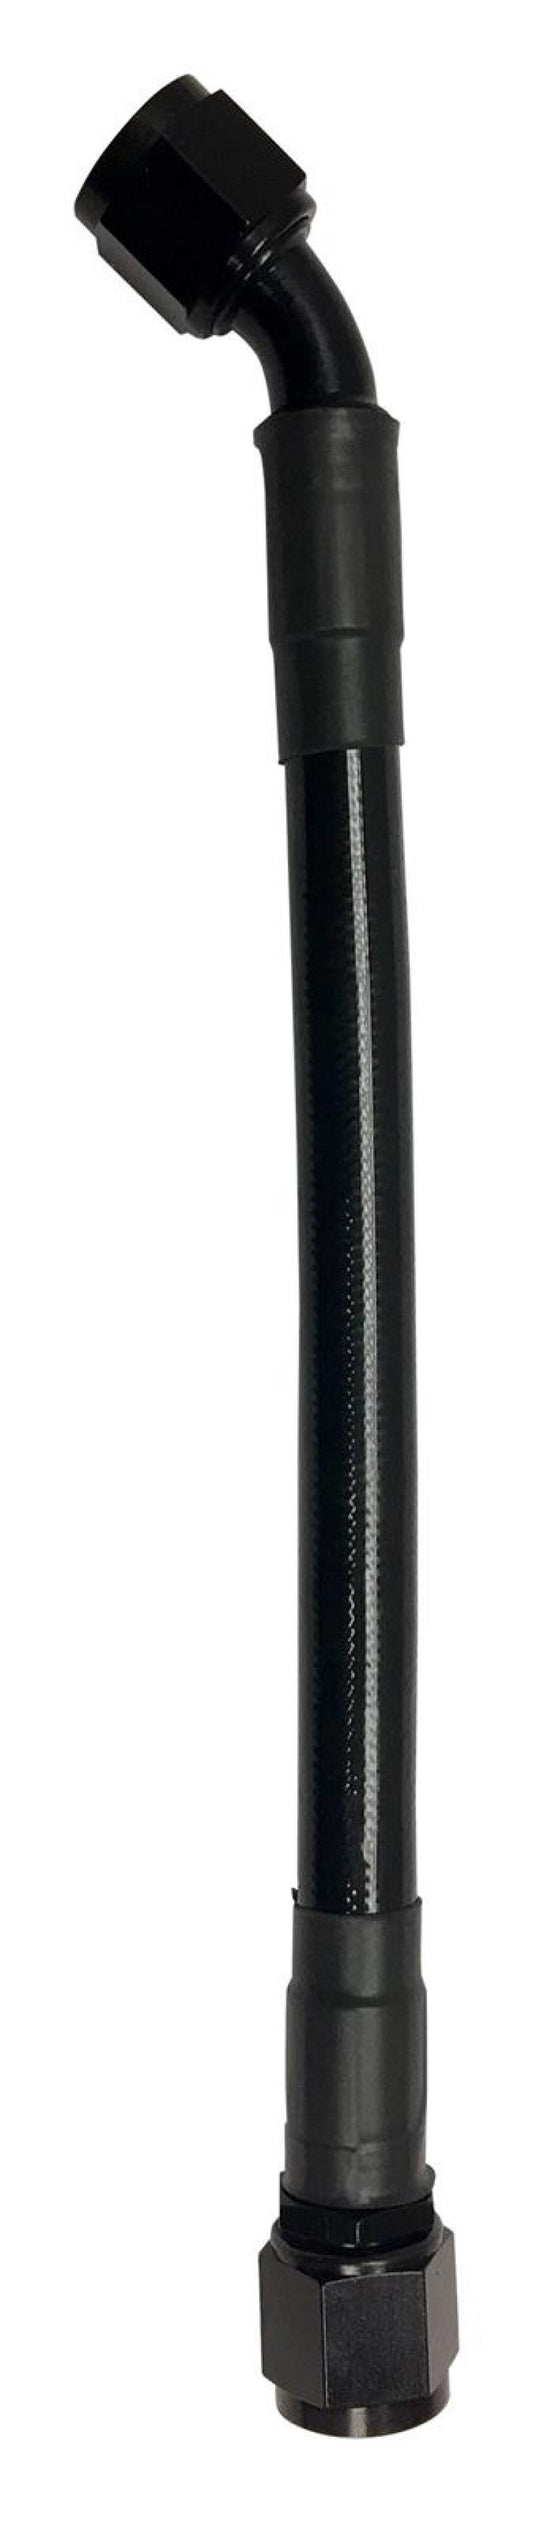 Fragola -10AN Ext Black PTFE Hose Assembly Straight x 45 Degree 72in